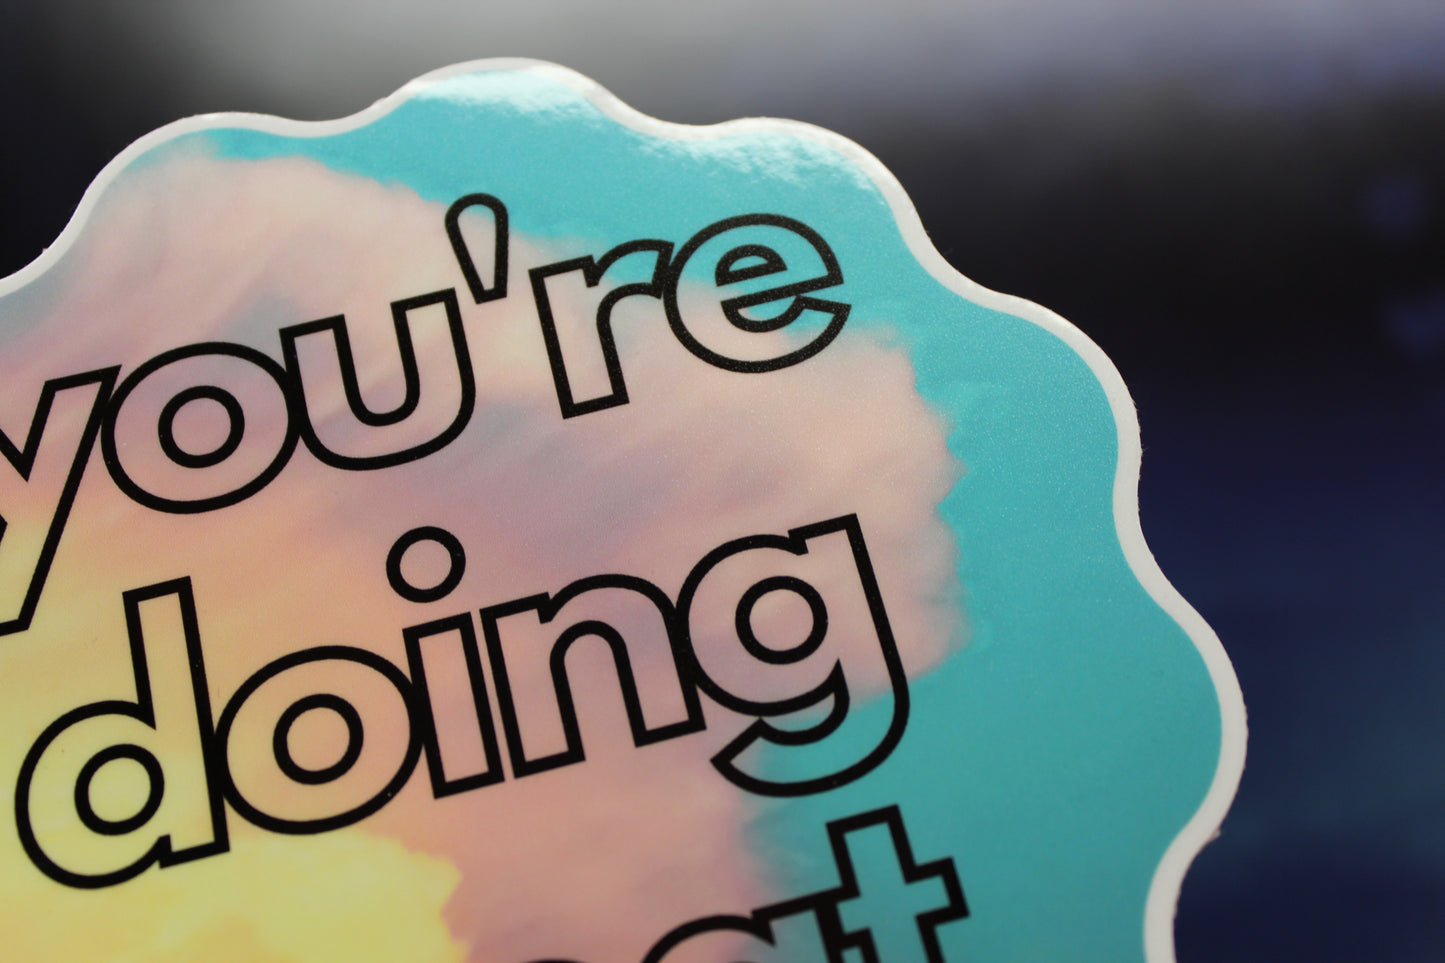 You're Doing Great Glossy Vinyl Bumper Sticker